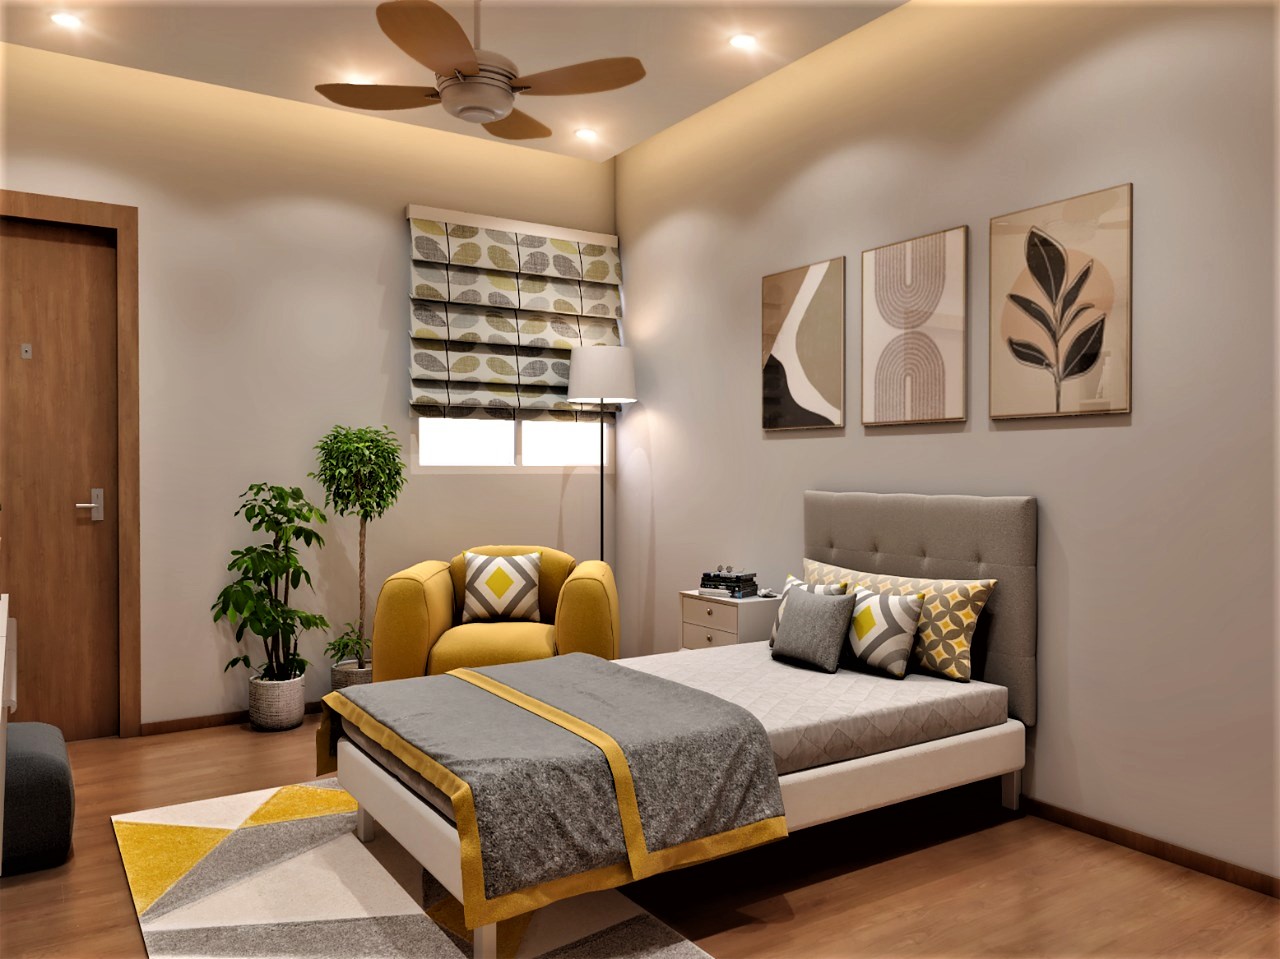 Bedroom Design With Wall Arts